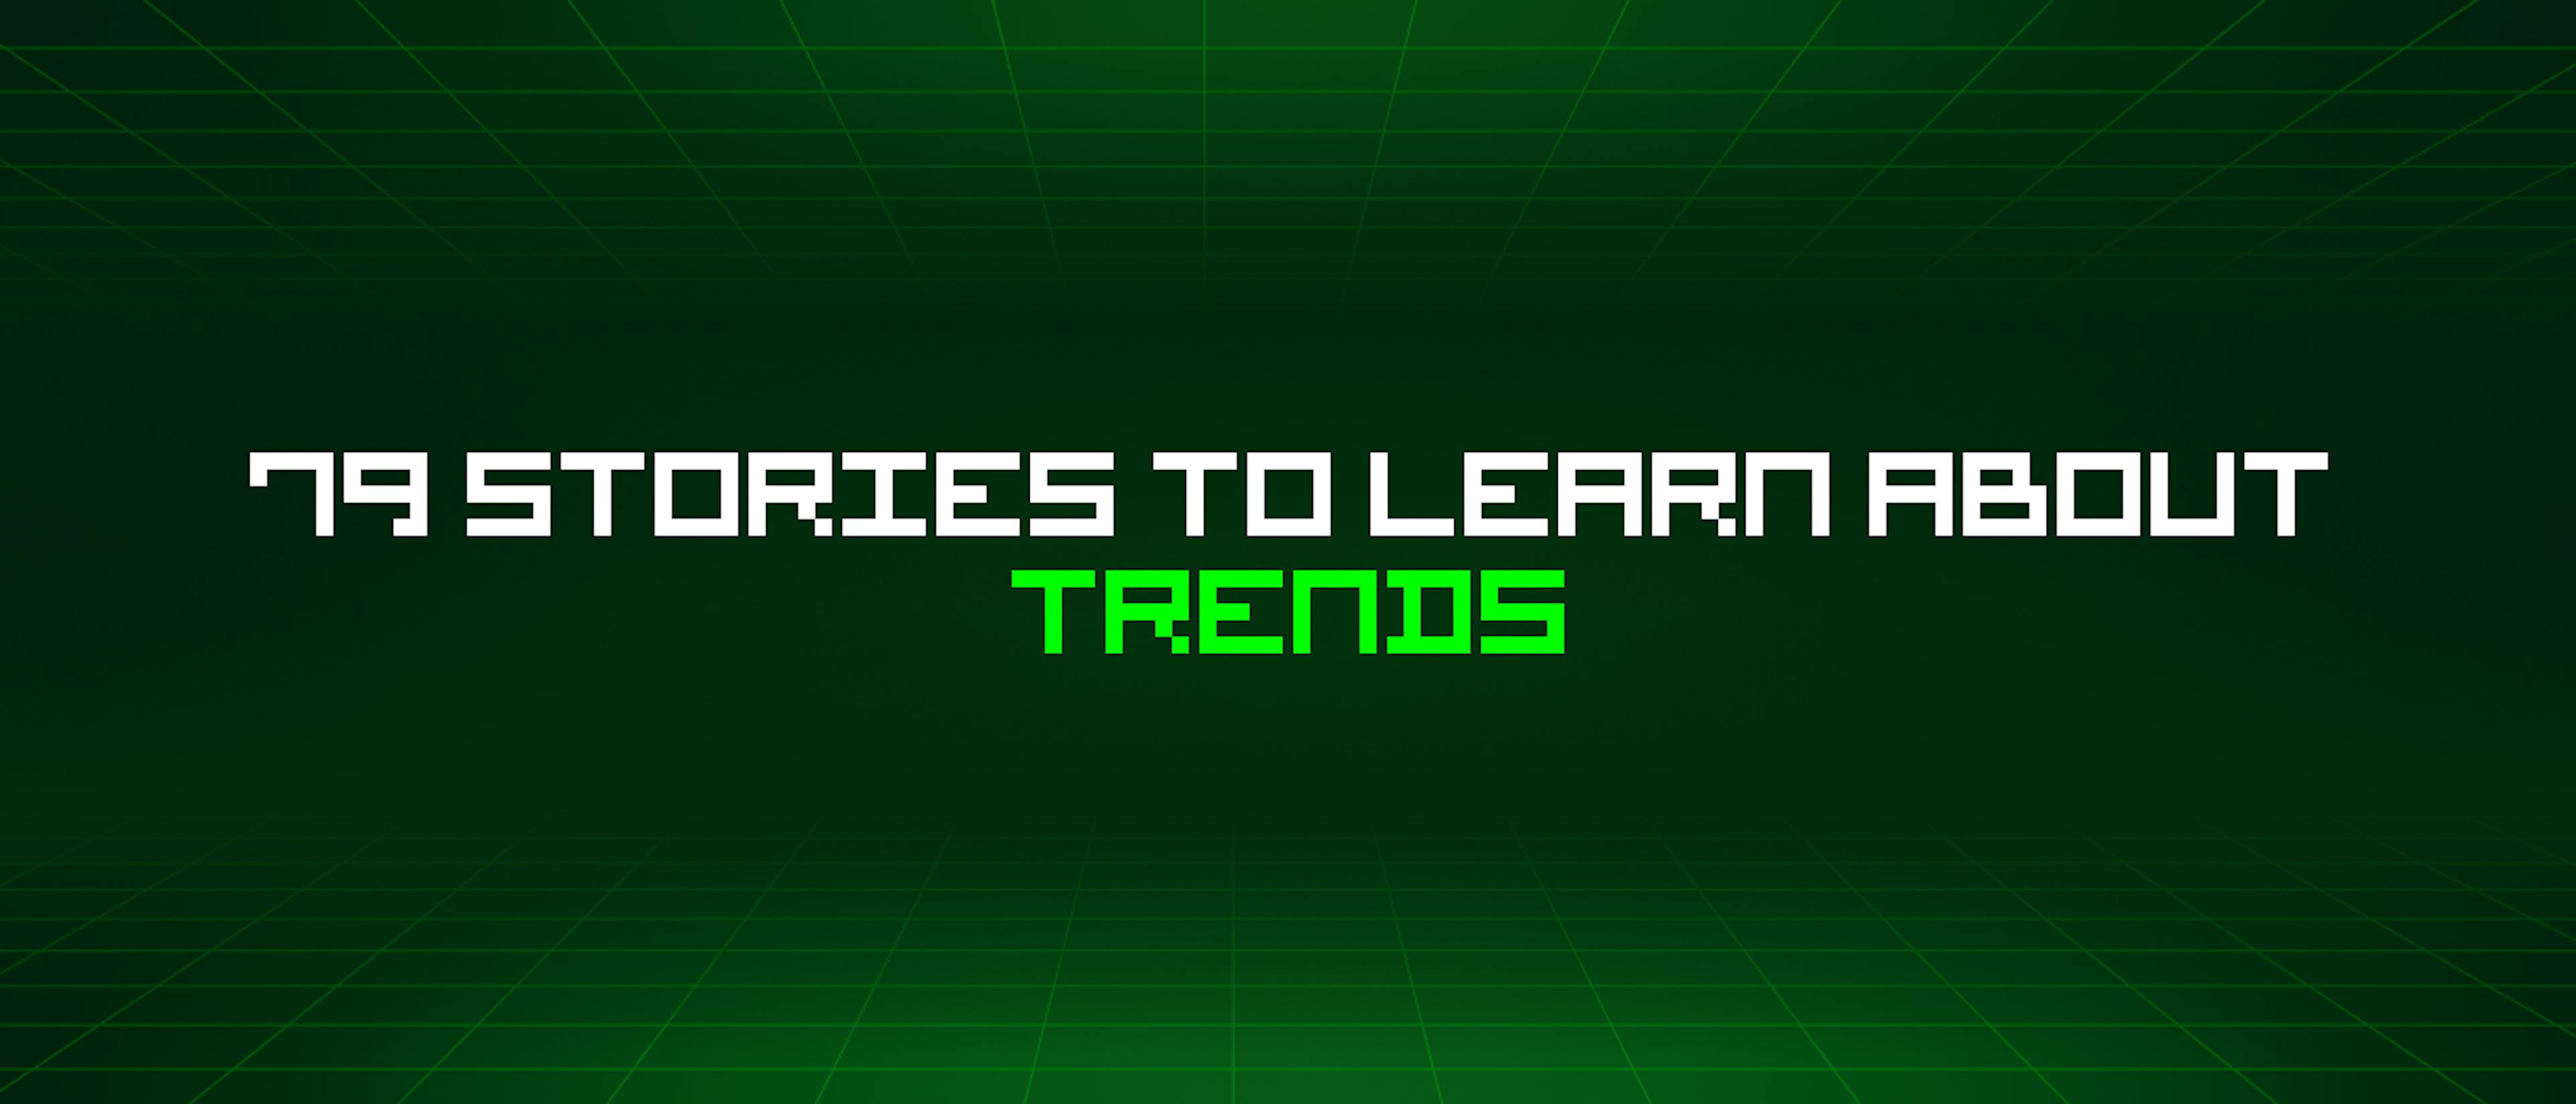 featured image - 79 Stories To Learn About Trends